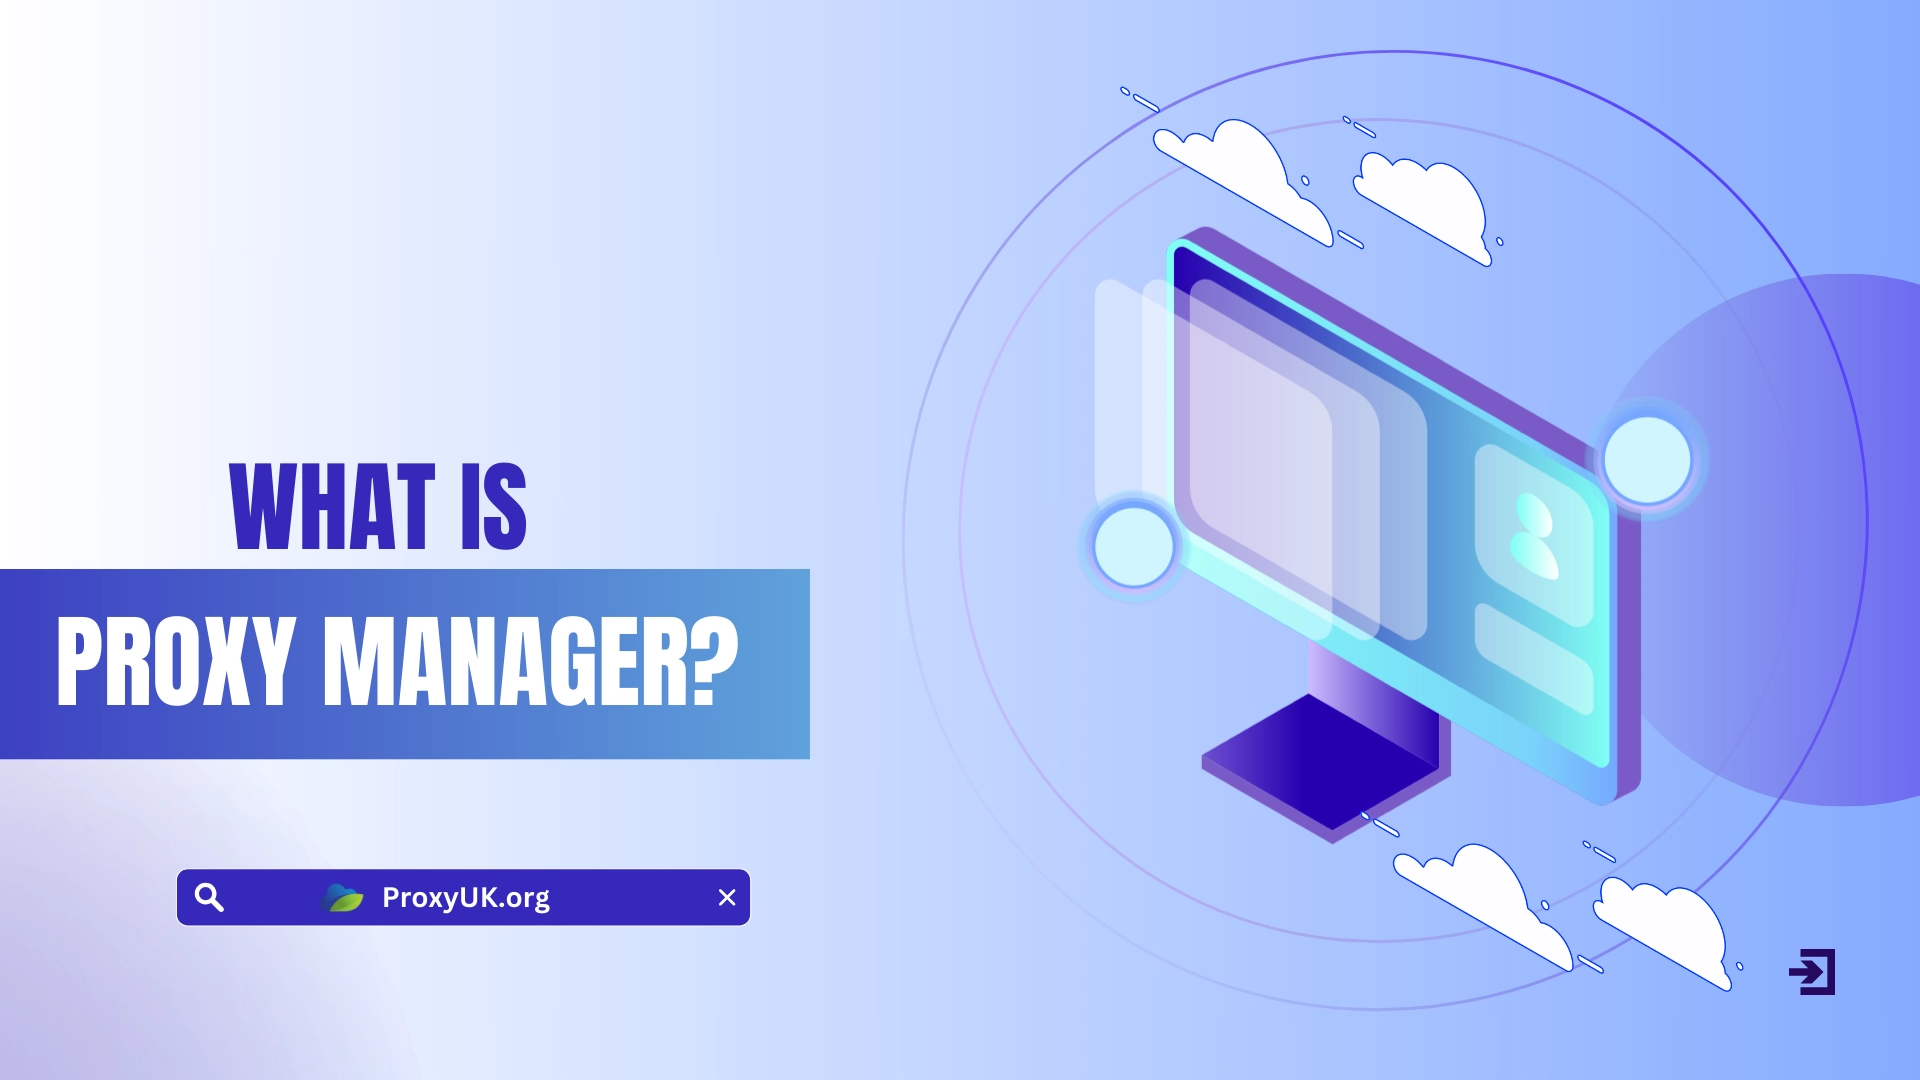 What is proxy manager